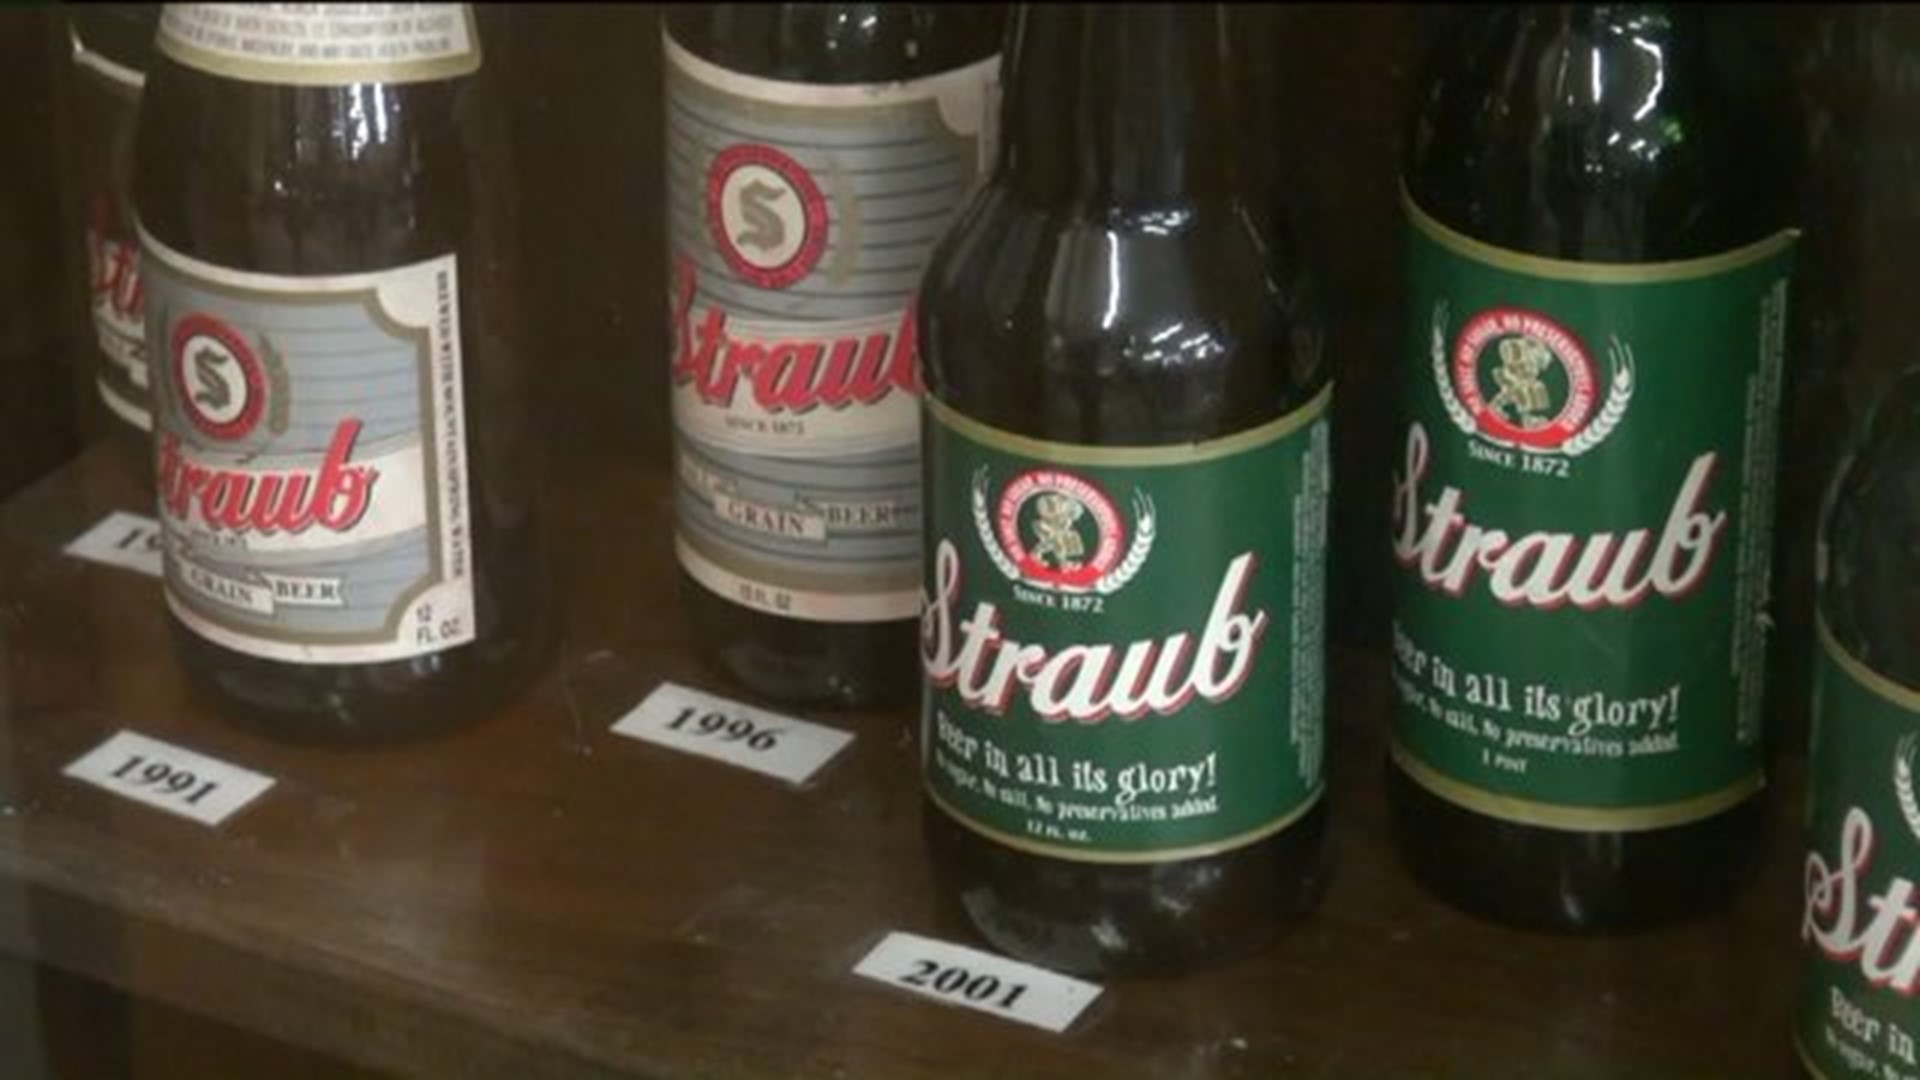 Made in PA: Straub Brewery